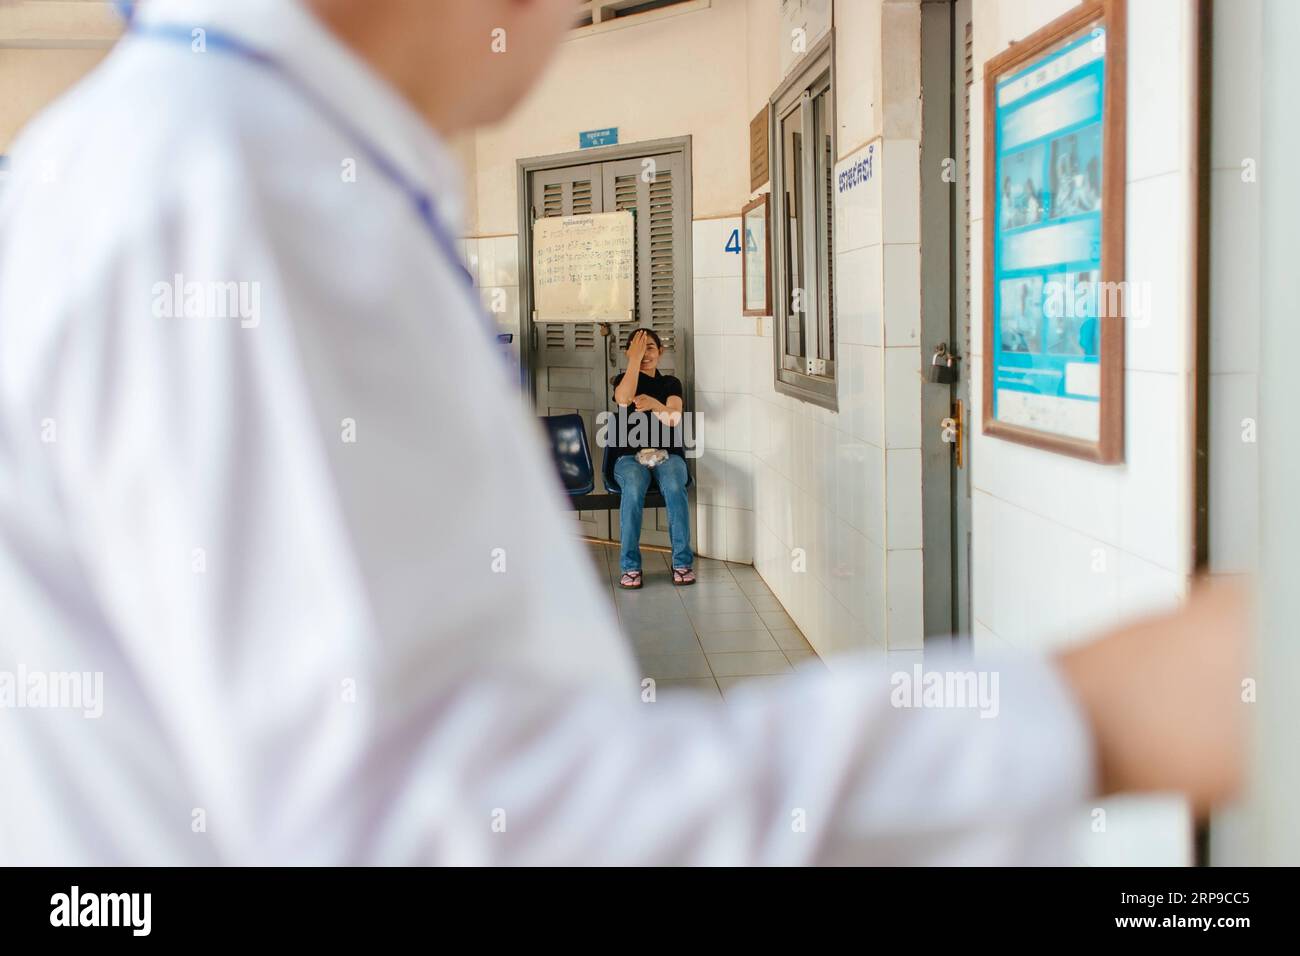 (190402) -- PHNOM PENH, April 2, 2019 (Xinhua) -- A doctor checks eyesight for Sum Meyle after a cataract operation at Kampong Cham Provincial Hospital in Kampong Cham, Cambodia, March 16, 2019. Sum Meyle, 36, is a single mother with five children. To help improve their financial conditions, two of Meyle s daughters are now working in the capital Phnom Penh while two of her sons are living in a children s nursing home. Meyle now lives in a rented shanty house with her youngest daughter. Meyle had suffered from cataract after her left eye was injured. Seven months ago, she had almost lost her e Stock Photo